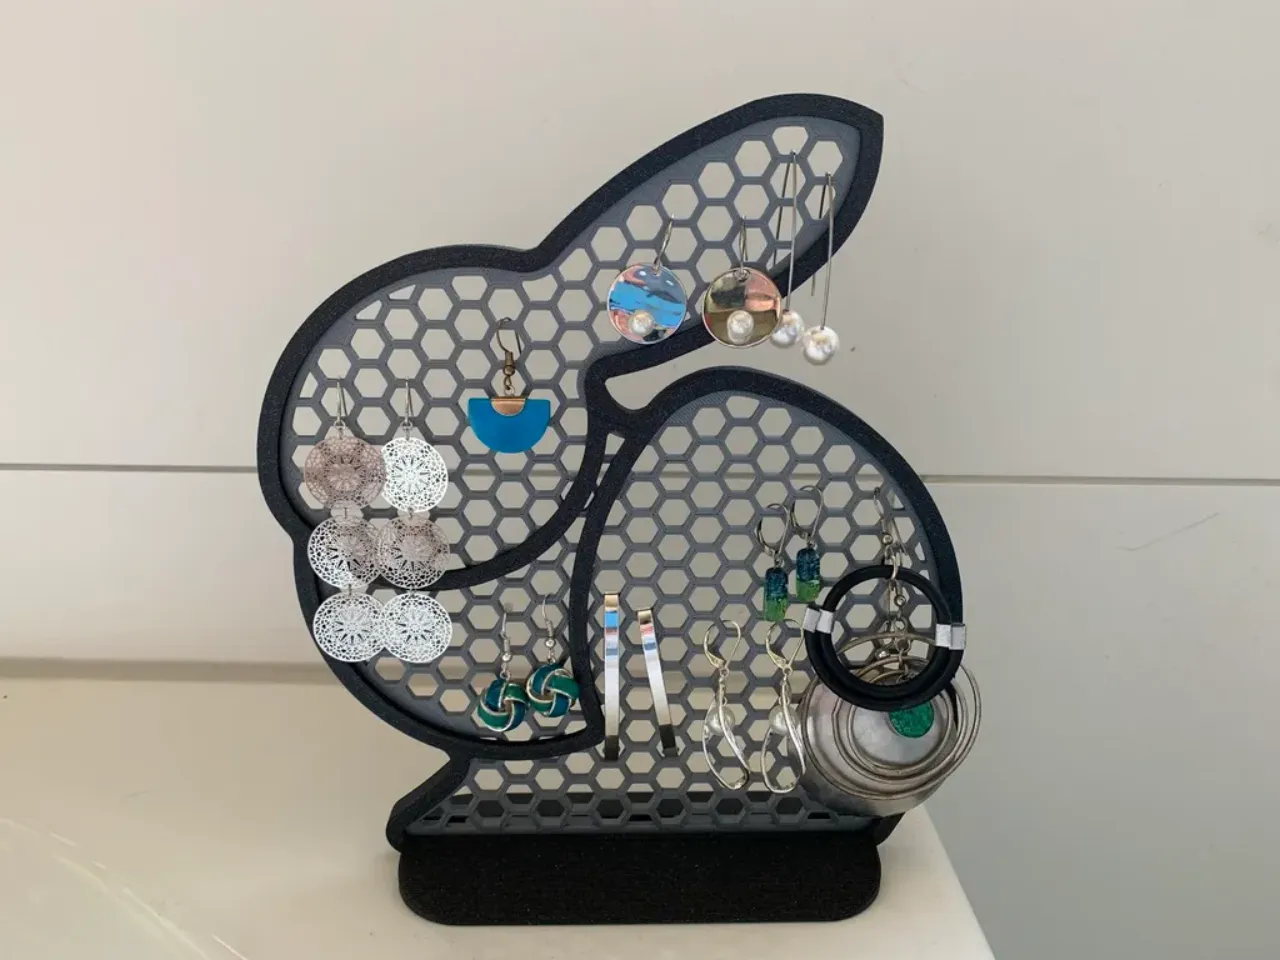 Bunny Earring Holder by That Engineering Guy